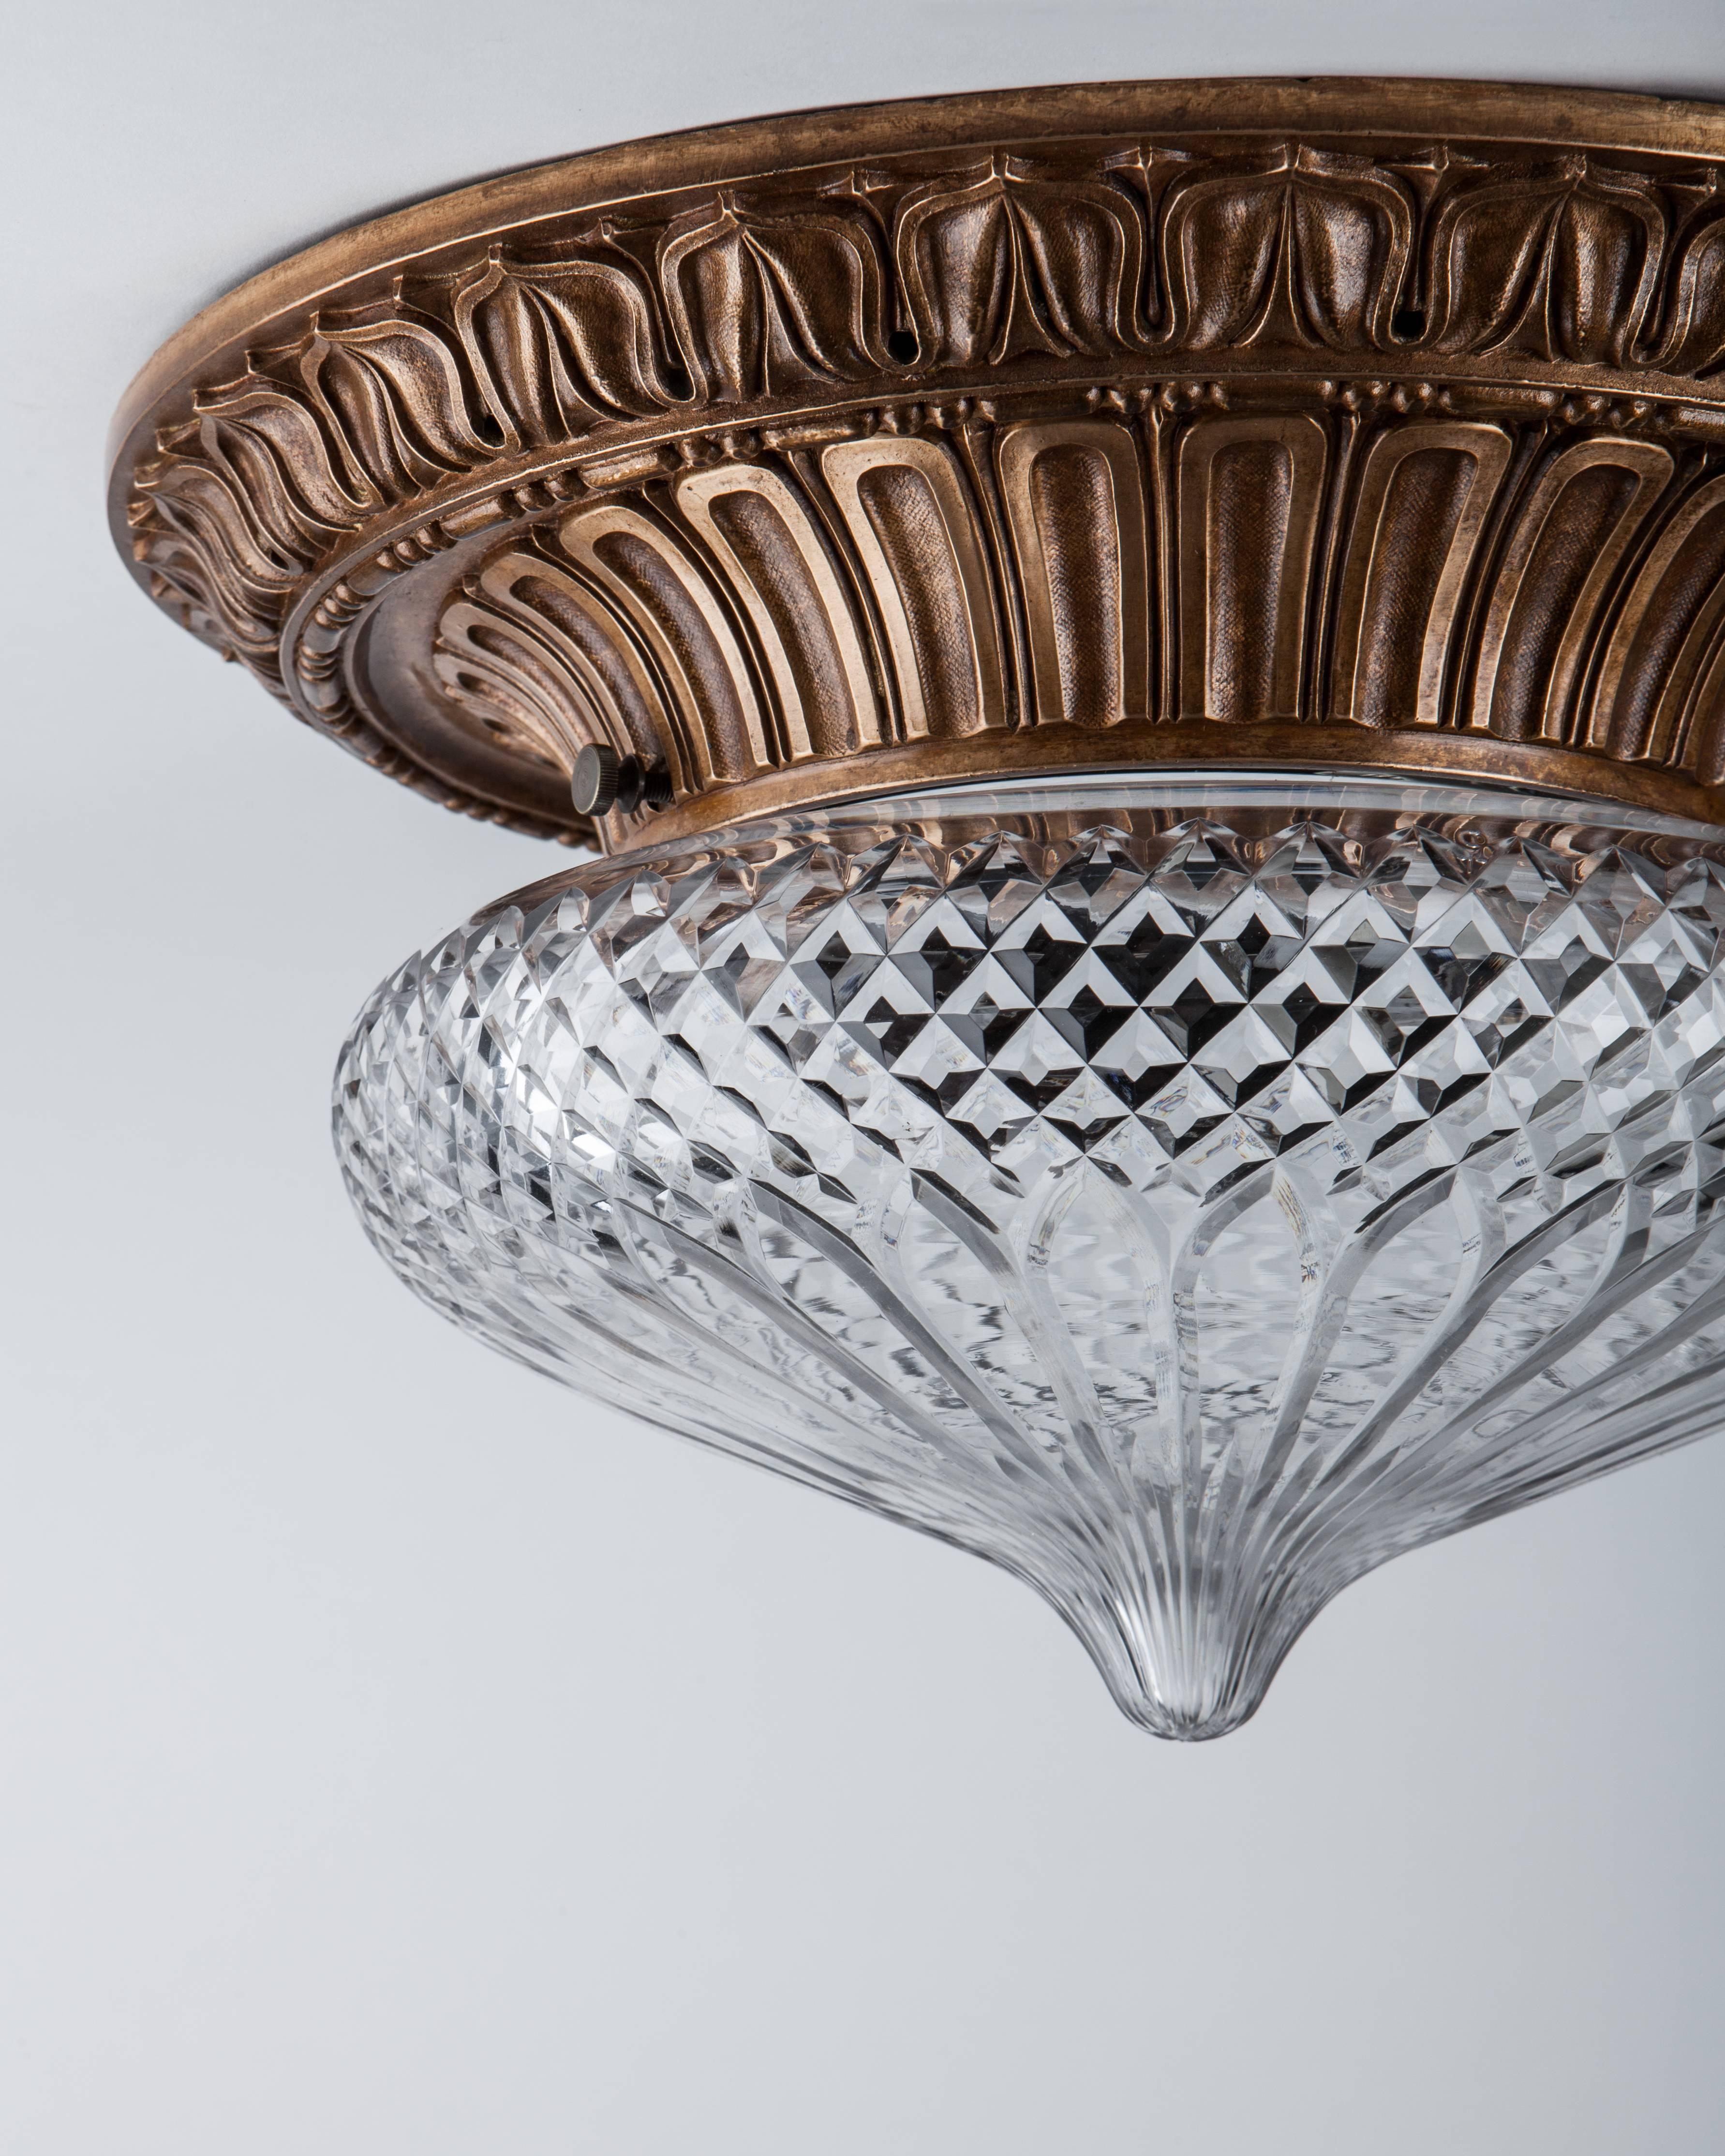 AHL3967,
a finely chased leaf-and-dart detailed bronze flush mount having a clear wheel-cut-glass shade with a diamond cross-hatched border. Signed by the New York maker E. F. Caldwell Co. Due to the antique nature of this fixture, there may be